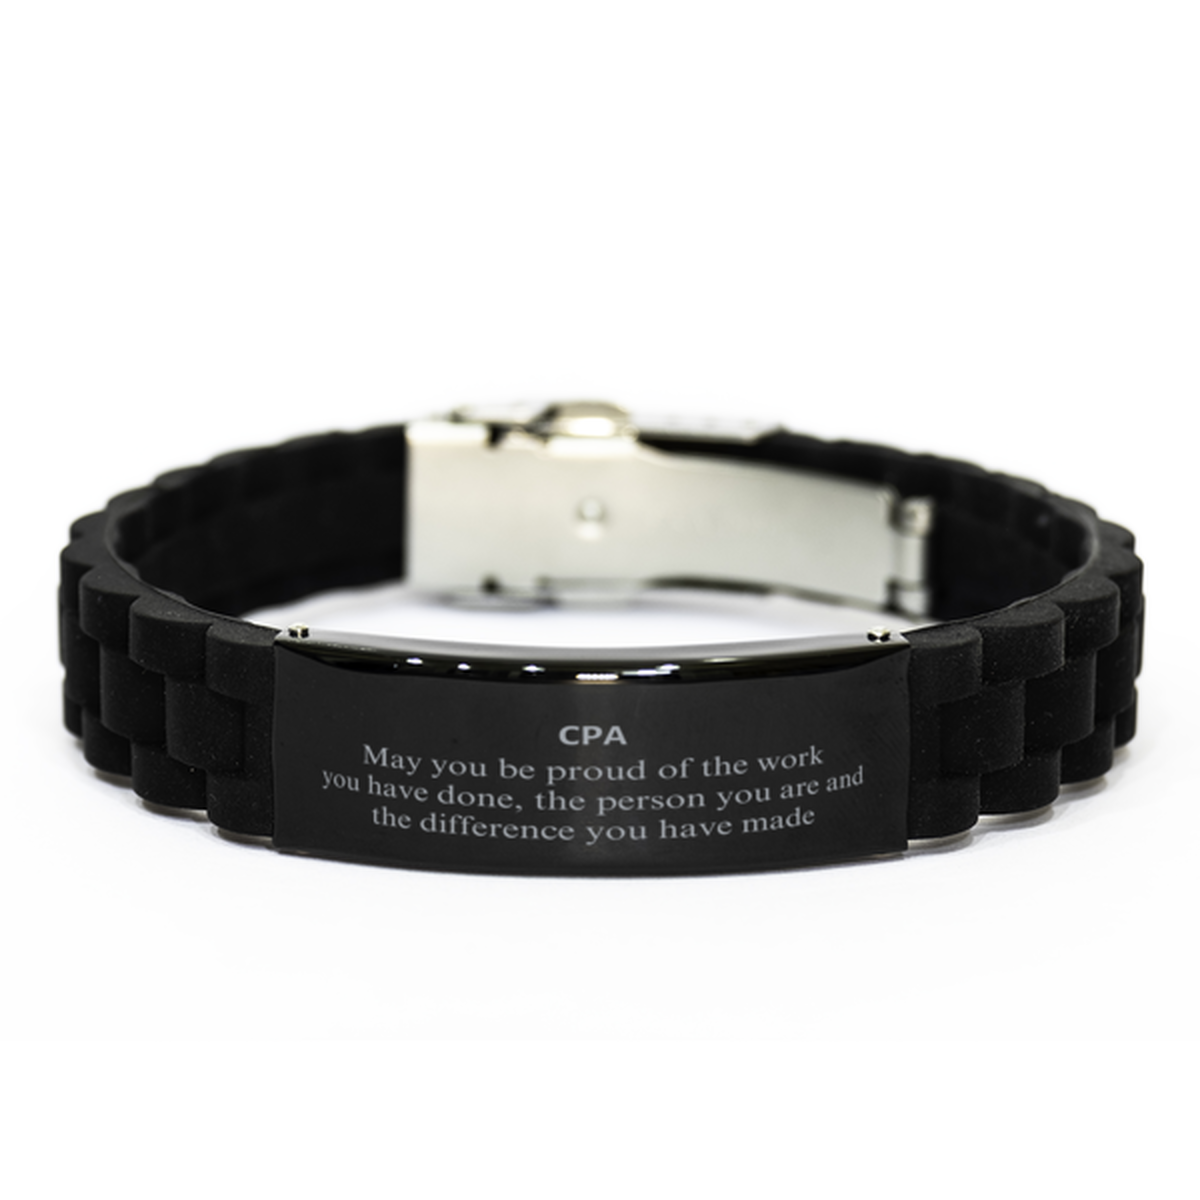 CPA May you be proud of the work you have done, Retirement CPA Black Glidelock Clasp Bracelet for Colleague Appreciation Gifts Amazing for CPA